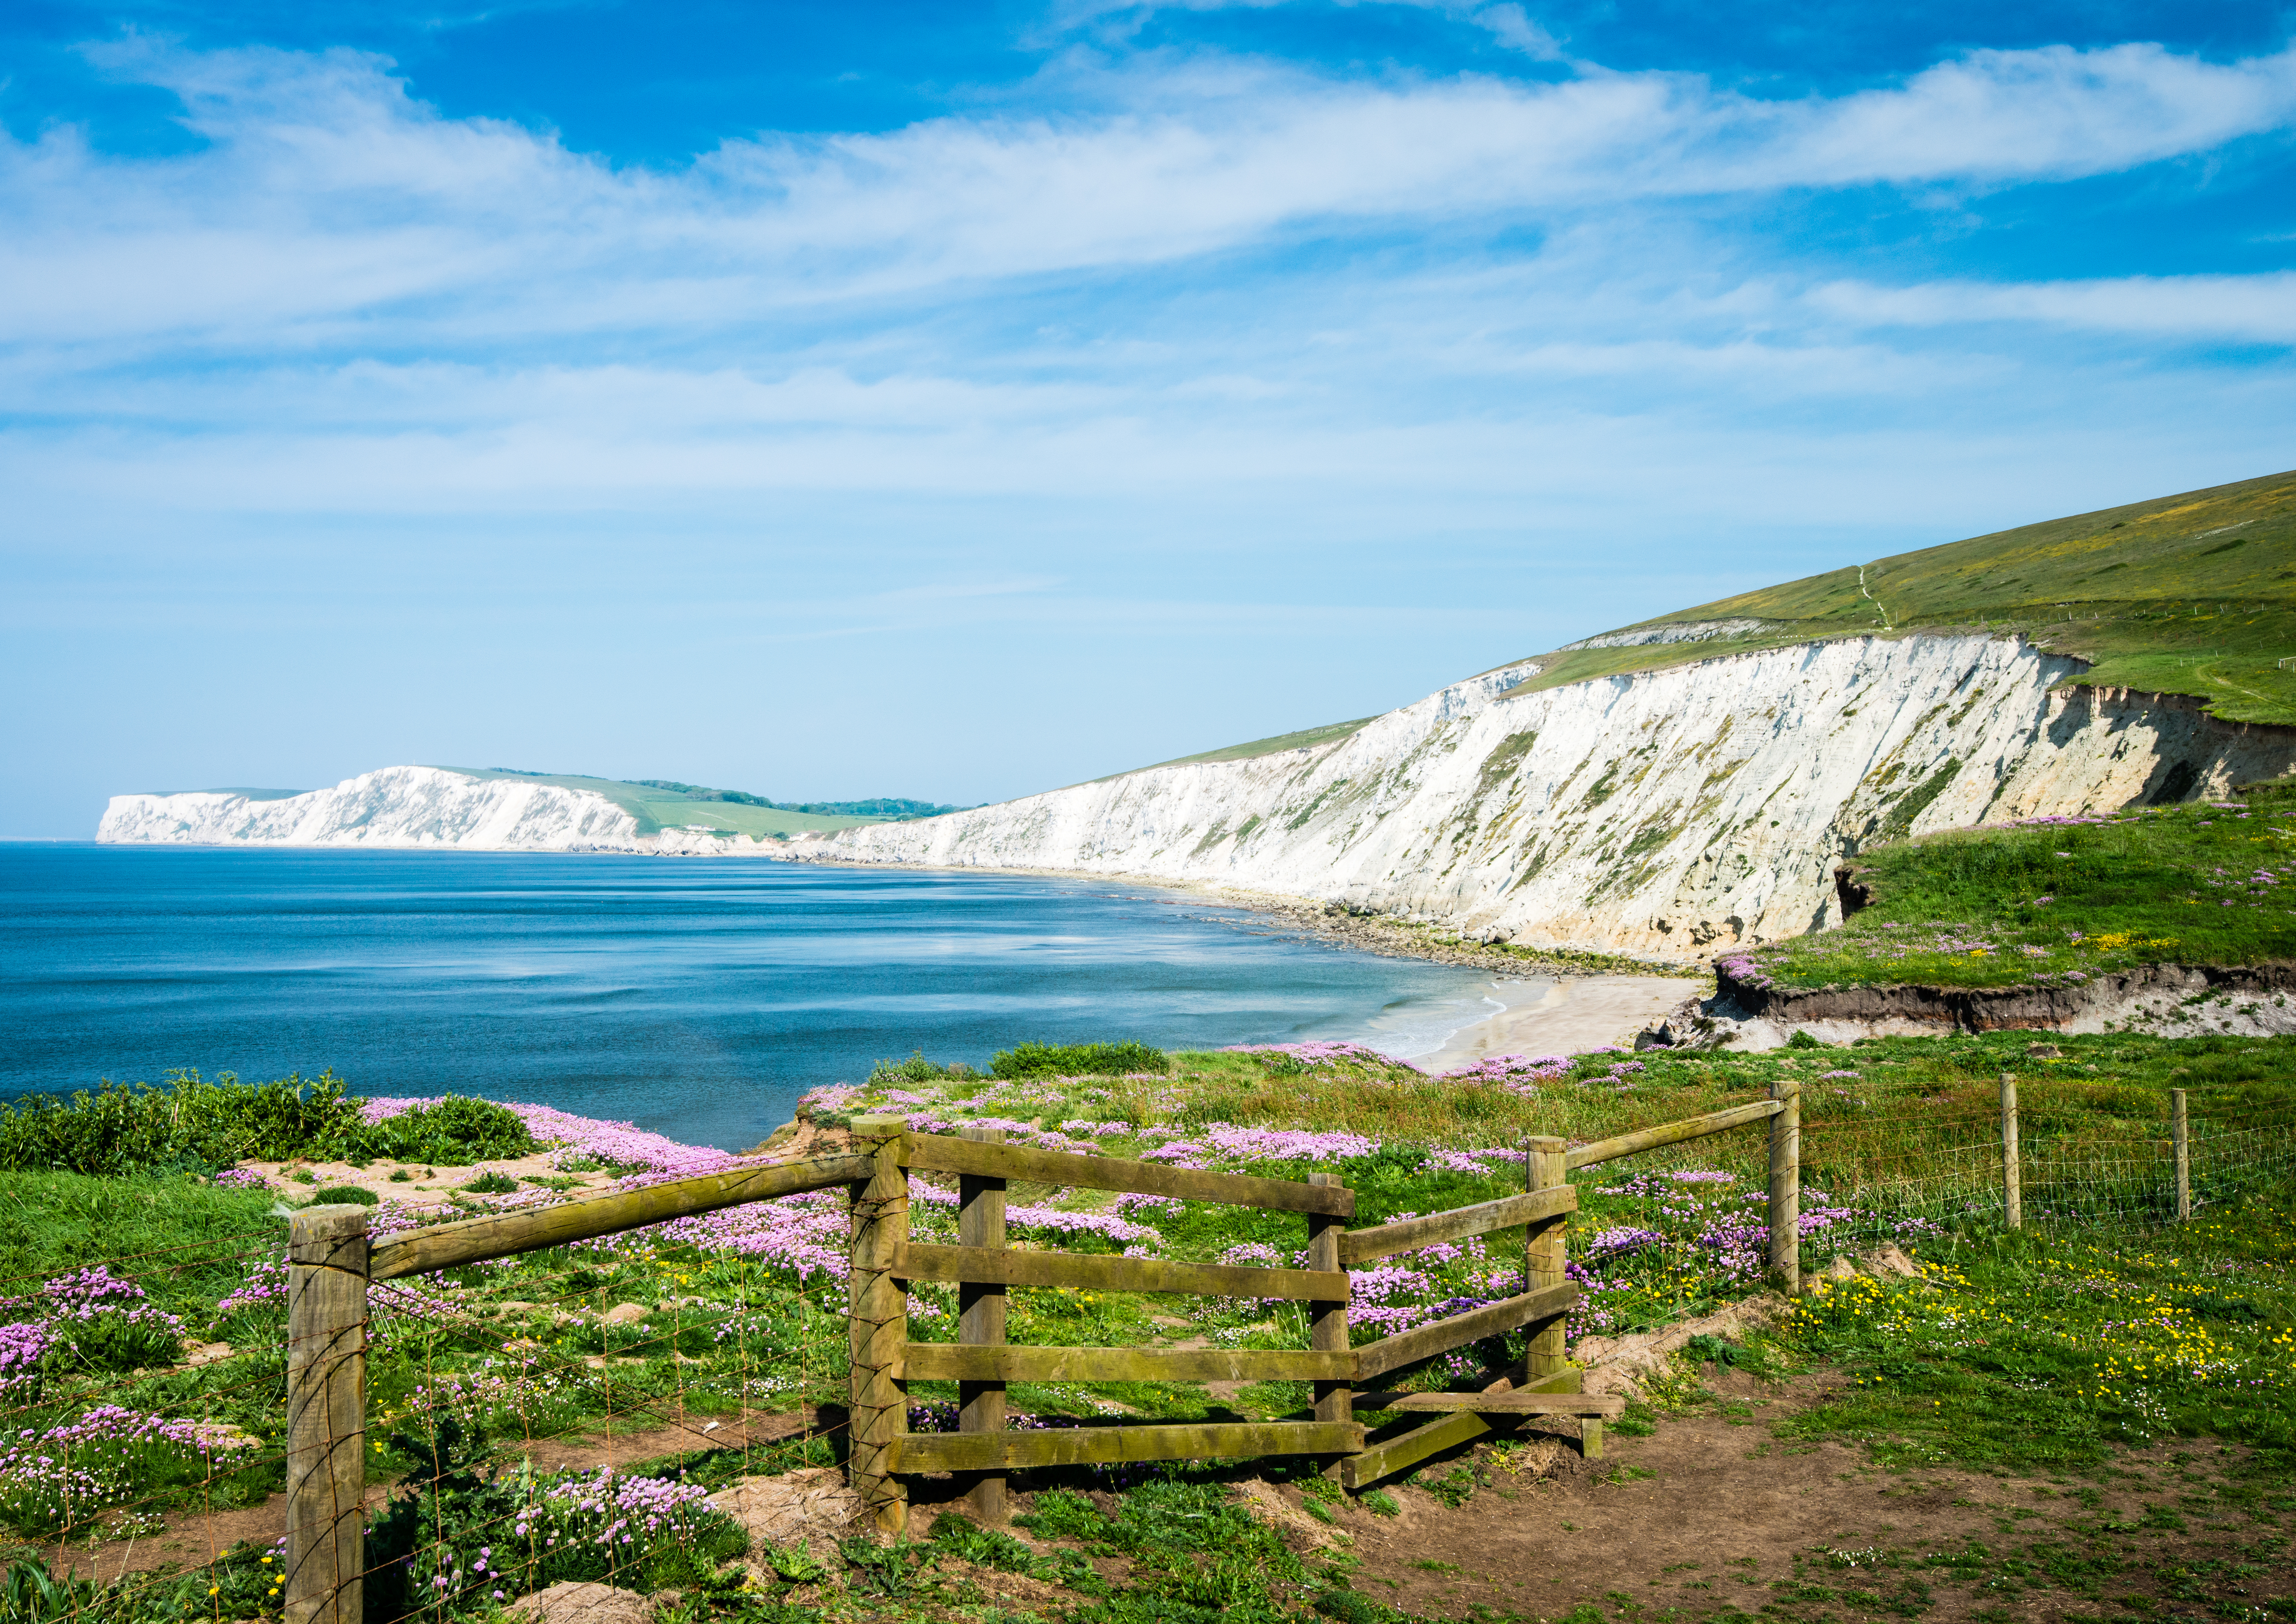 The beautiful white cliffs on the Isle of Wight